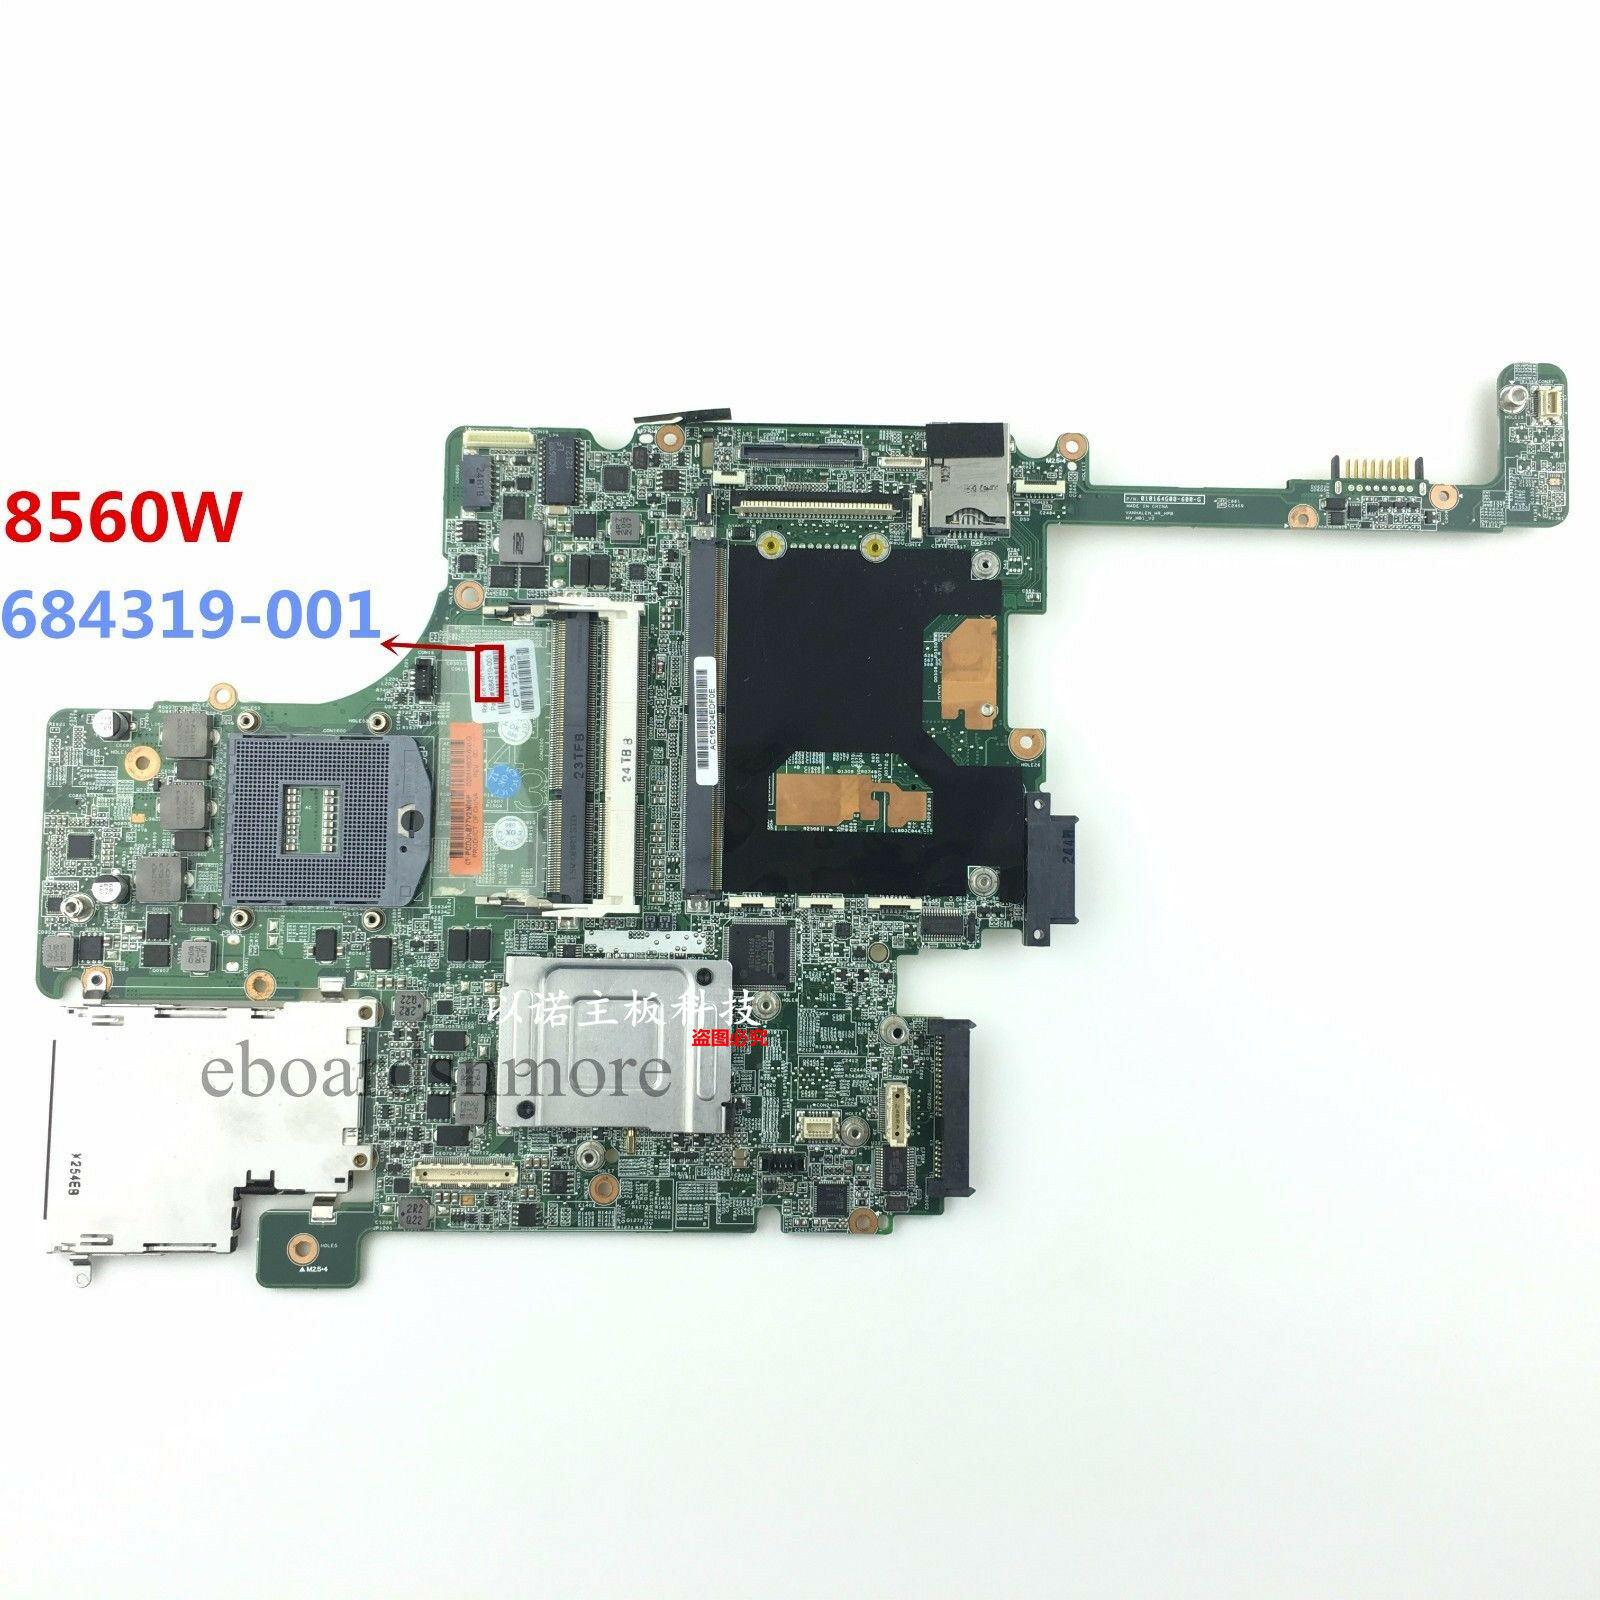 HP 8560W Laptop Motherboard with Graphic slot, 684319-001 Grade A Brand: HP Input/Output Ports: HDMI Form